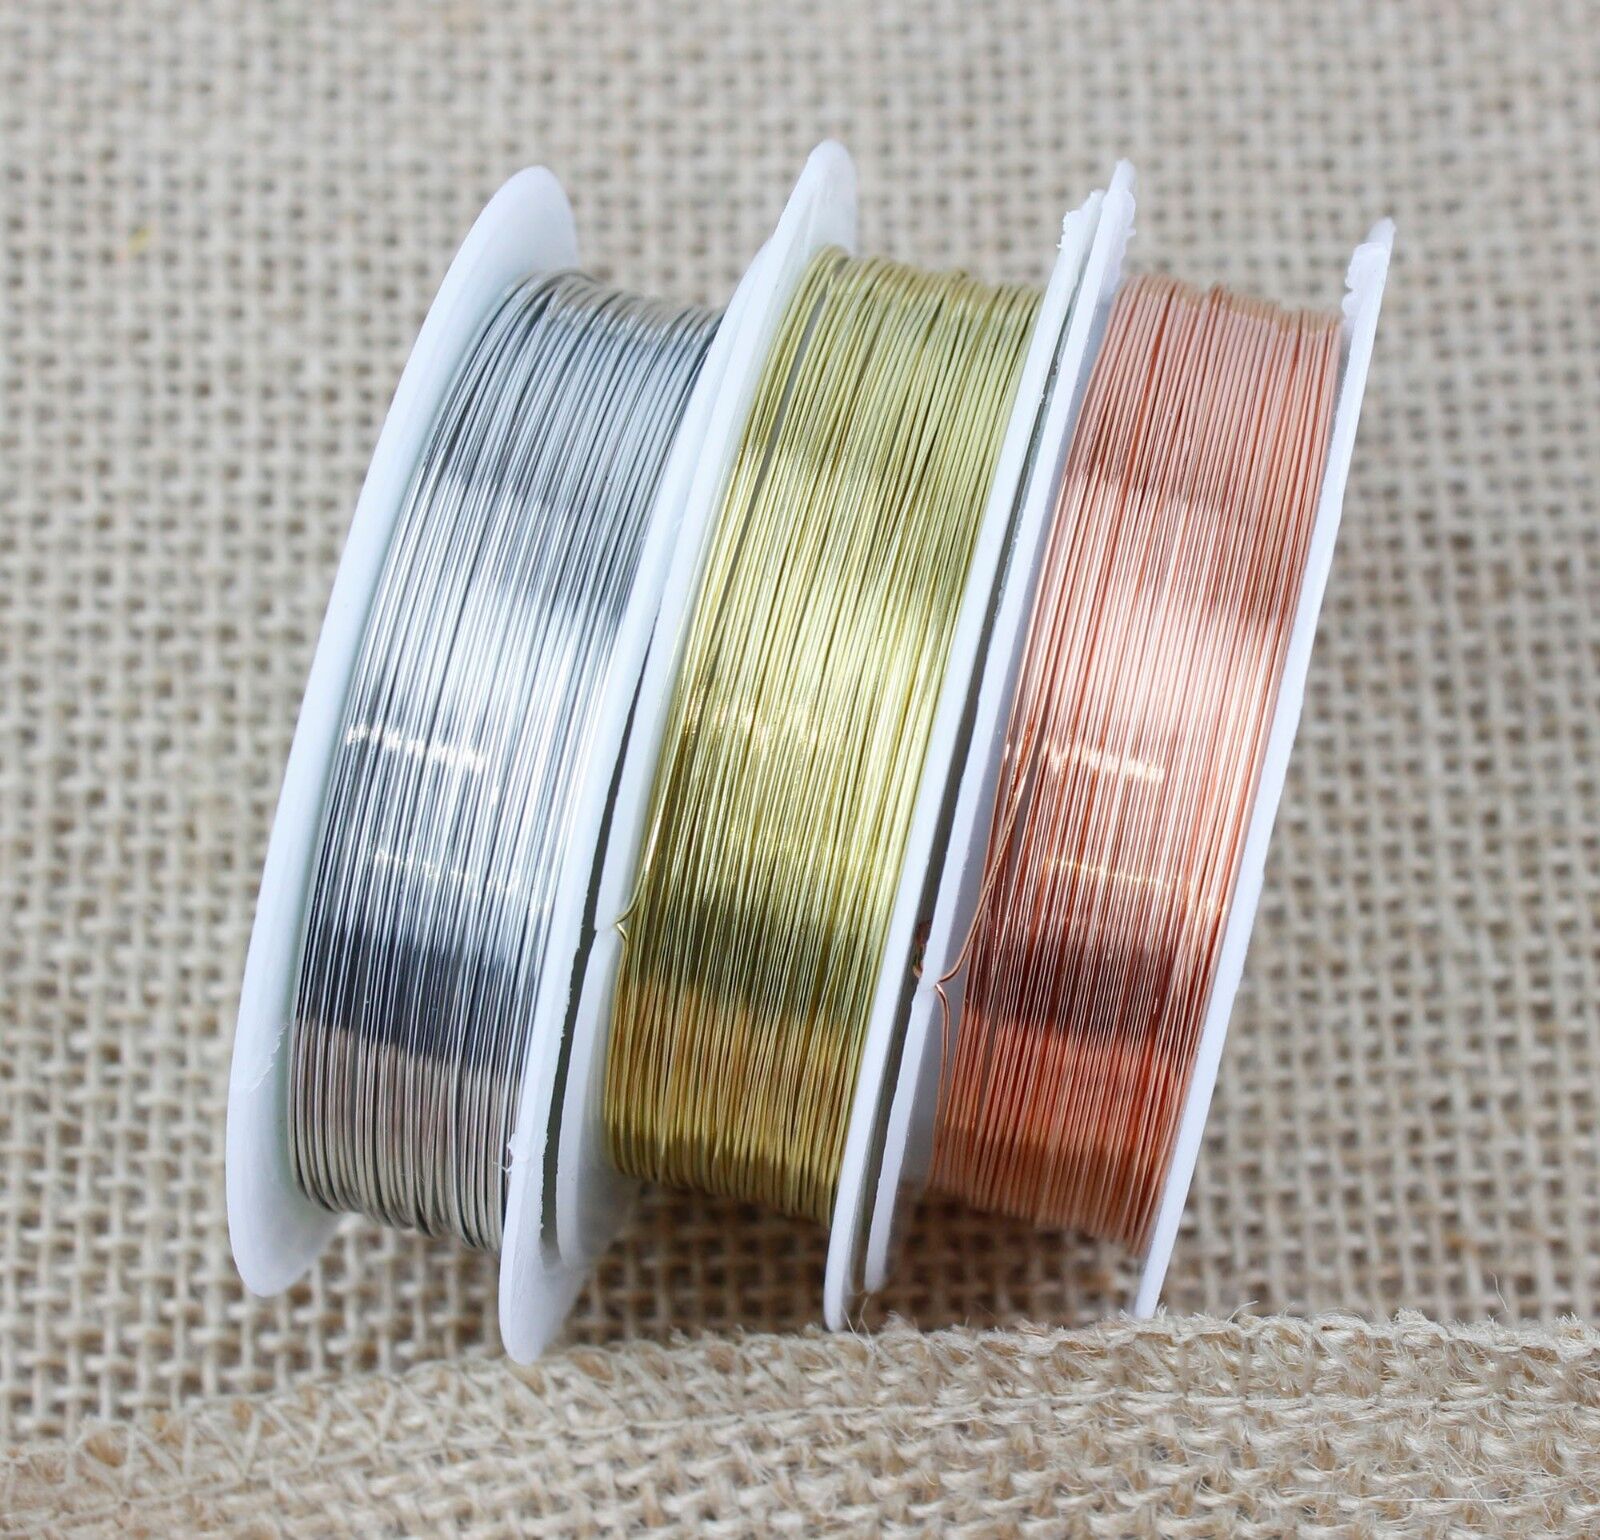 Silver Gold Copper Plated Beading Wire Craft 0.2mm - 1mm BUY 3 GET 3 FREE